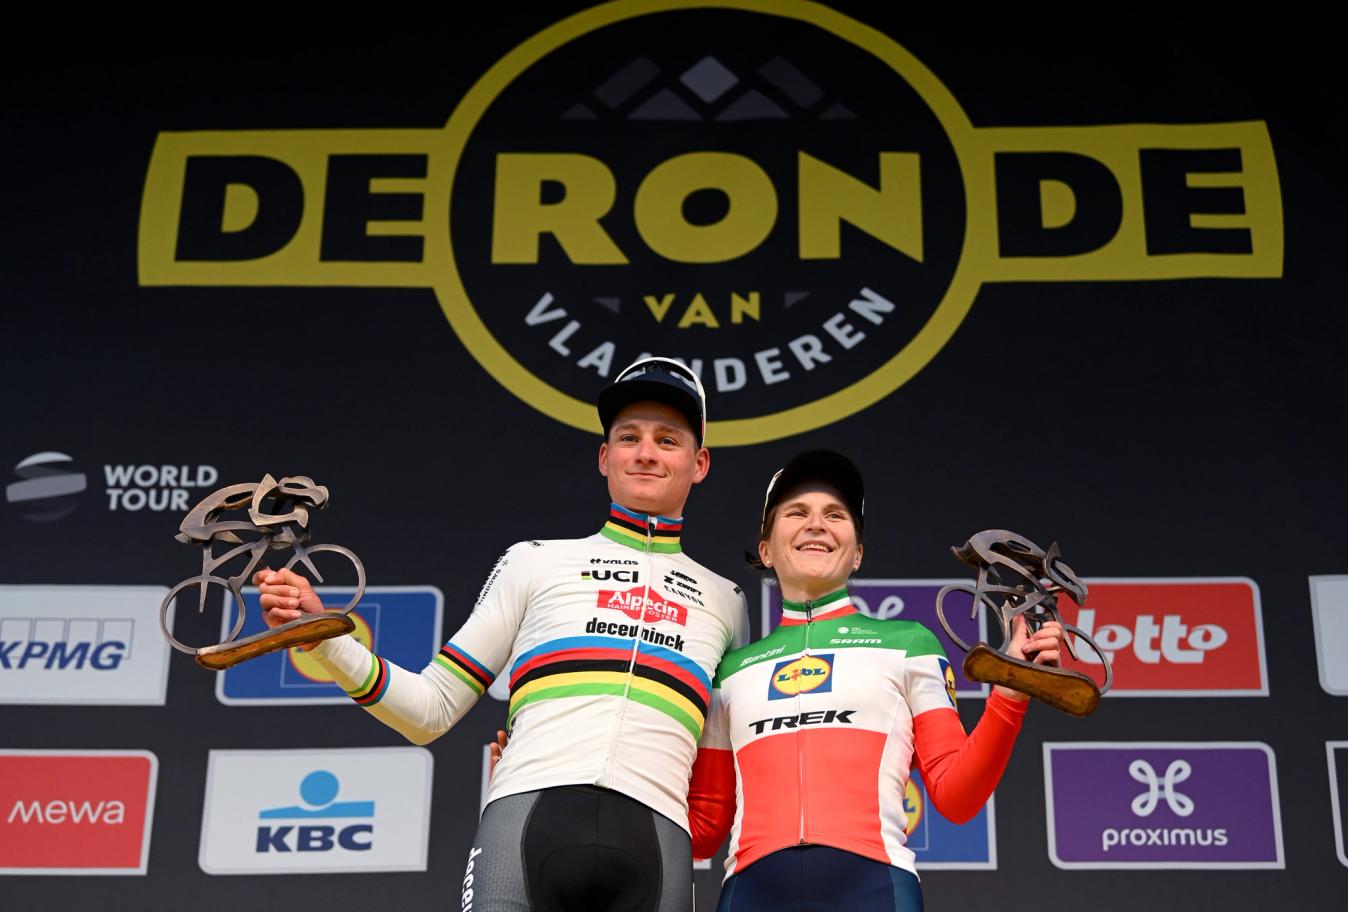 Van der Poel (left) and Elisa Longo Borghini (right) stand on the podium at the Tour of Flanders